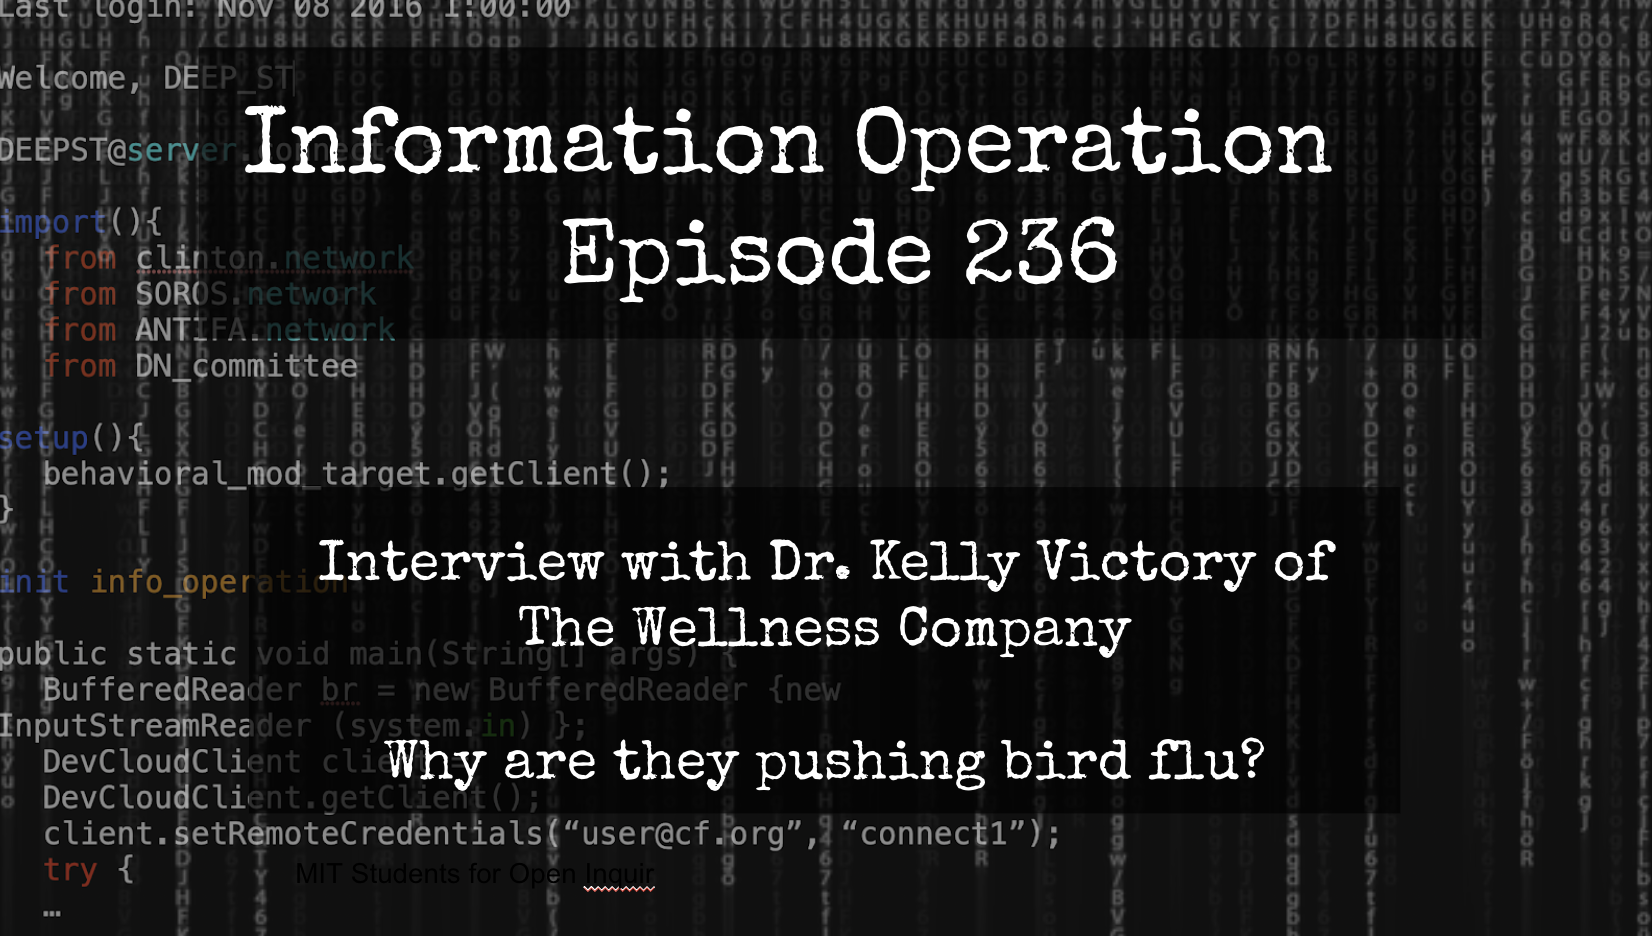 LIVE 7pm EST: IO Episode 236 - Dr. Kelly Victory - Why Are They Pushing Bird Flu?